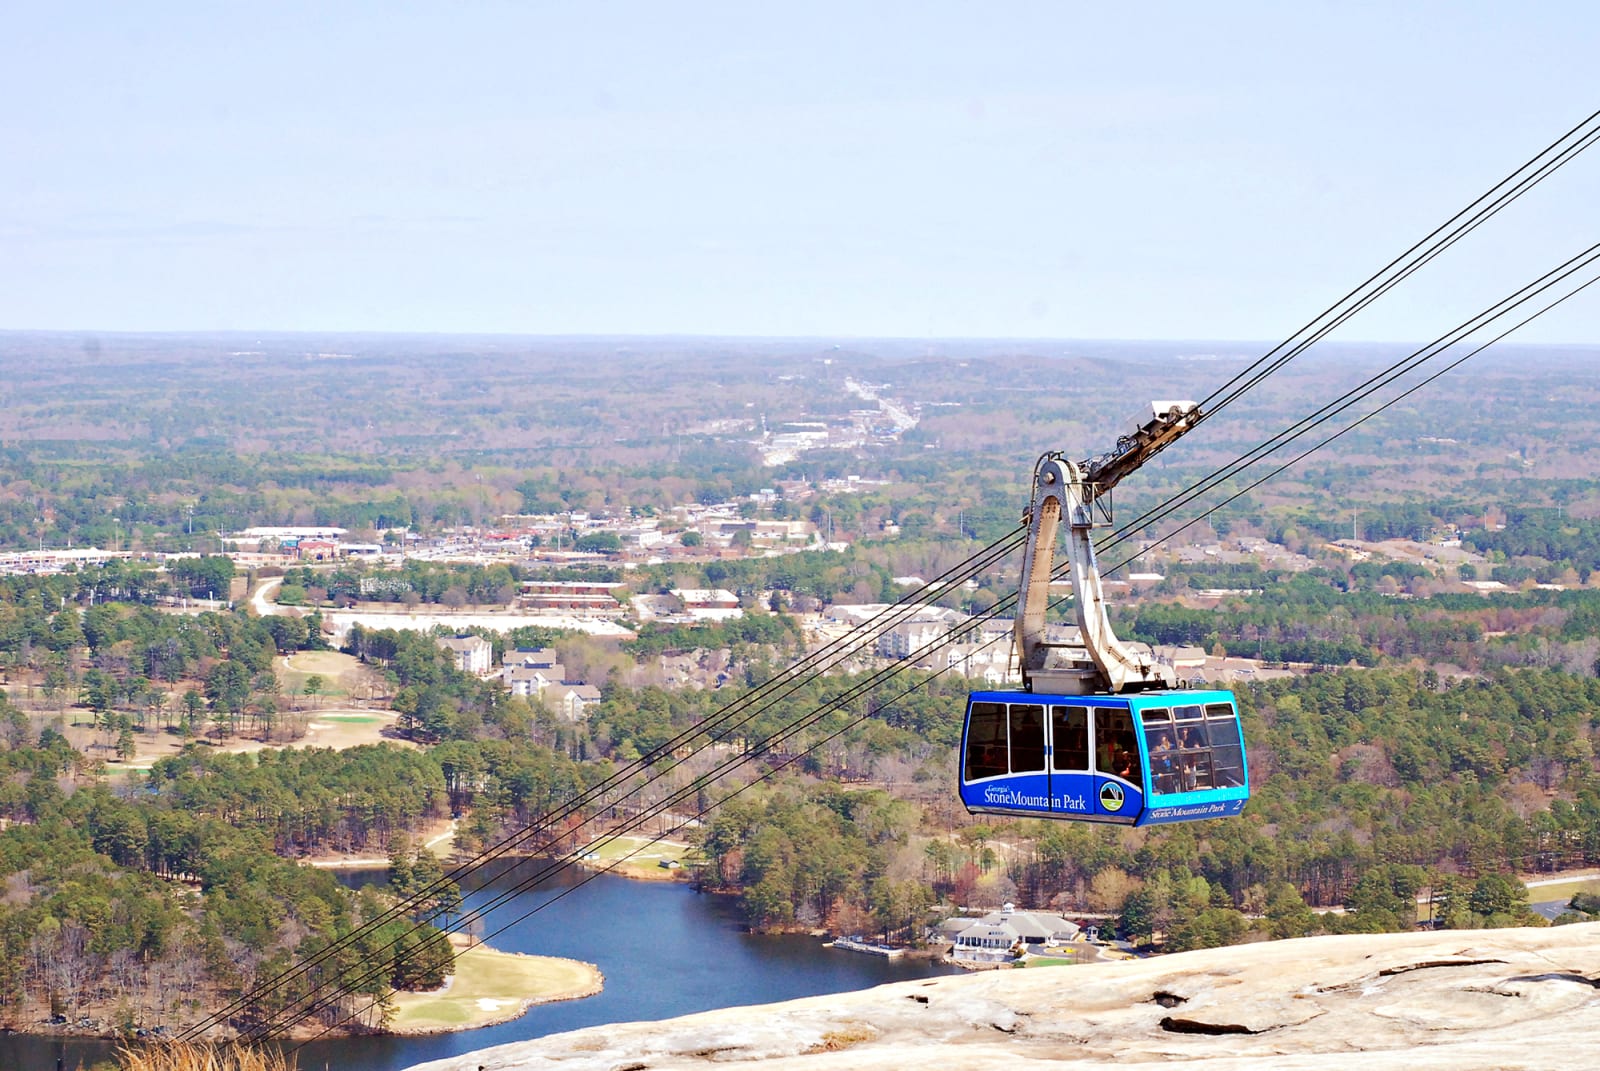 Spend the Day at Stone Mountain Park